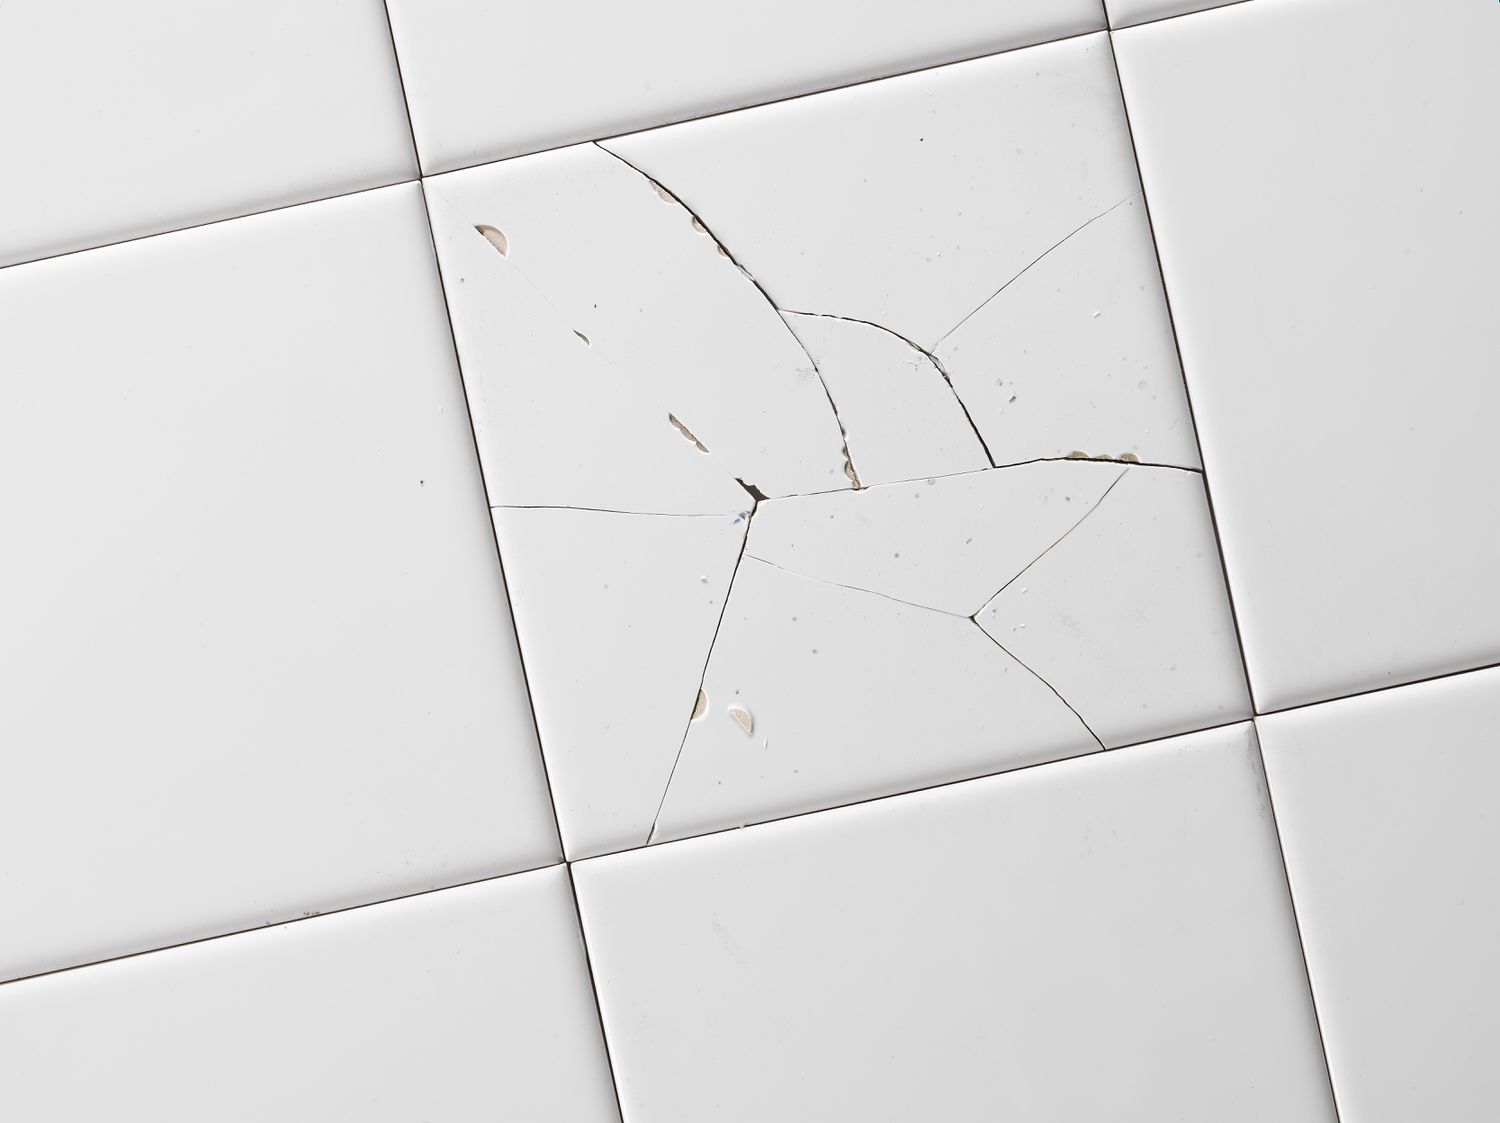 How To Fix A Cracked Shower Tile